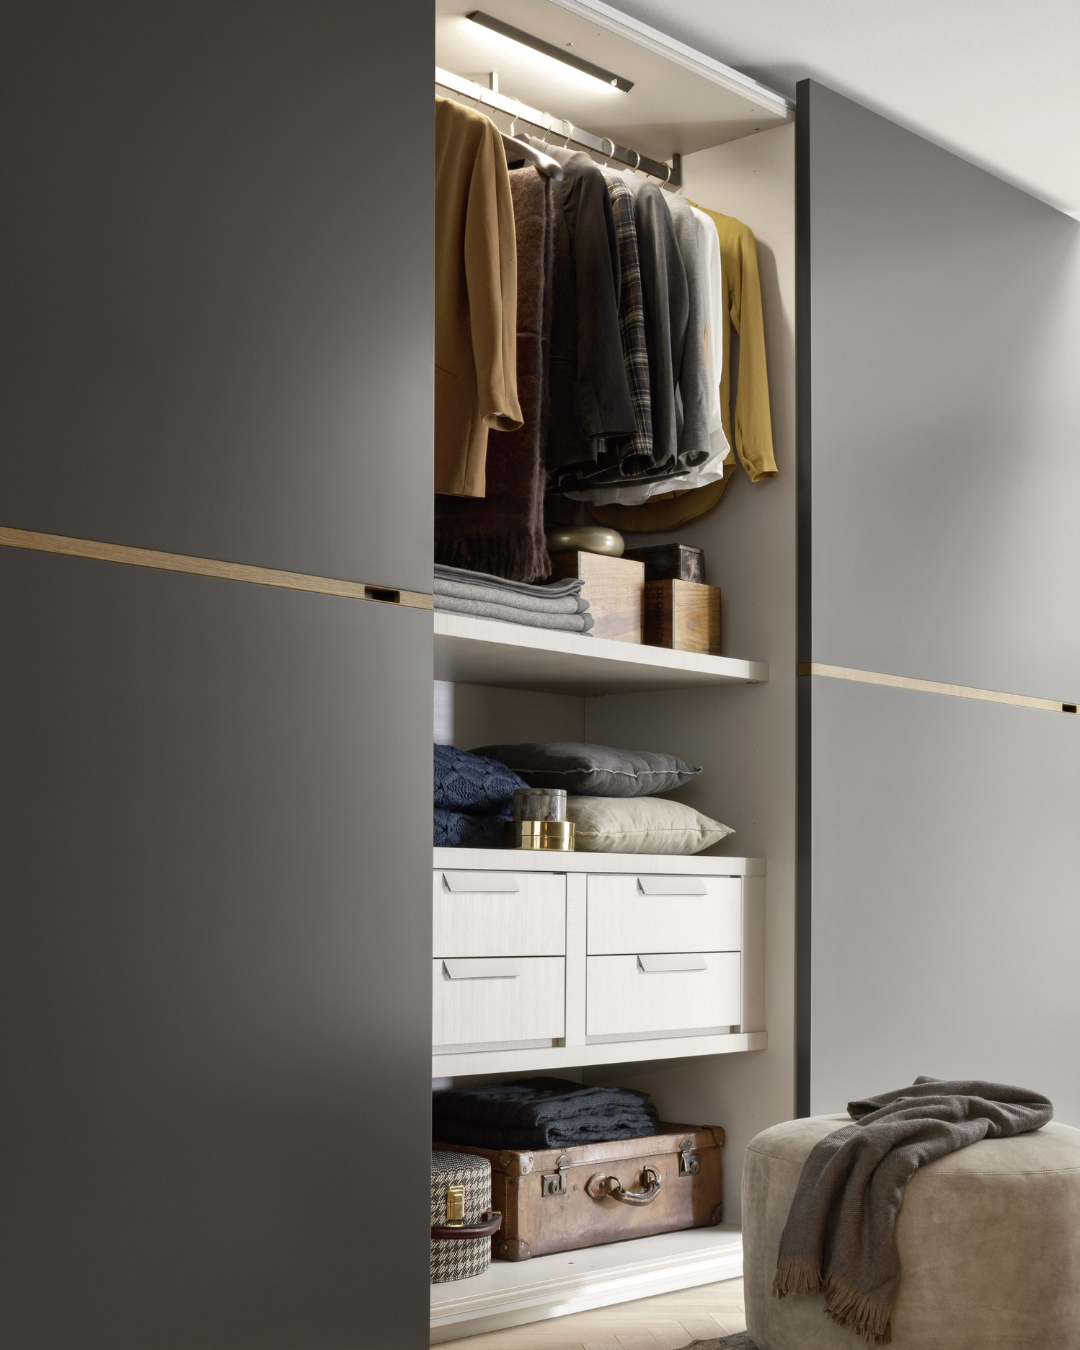 Top 9 Wardrobe Design Tips For Small Bedrooms